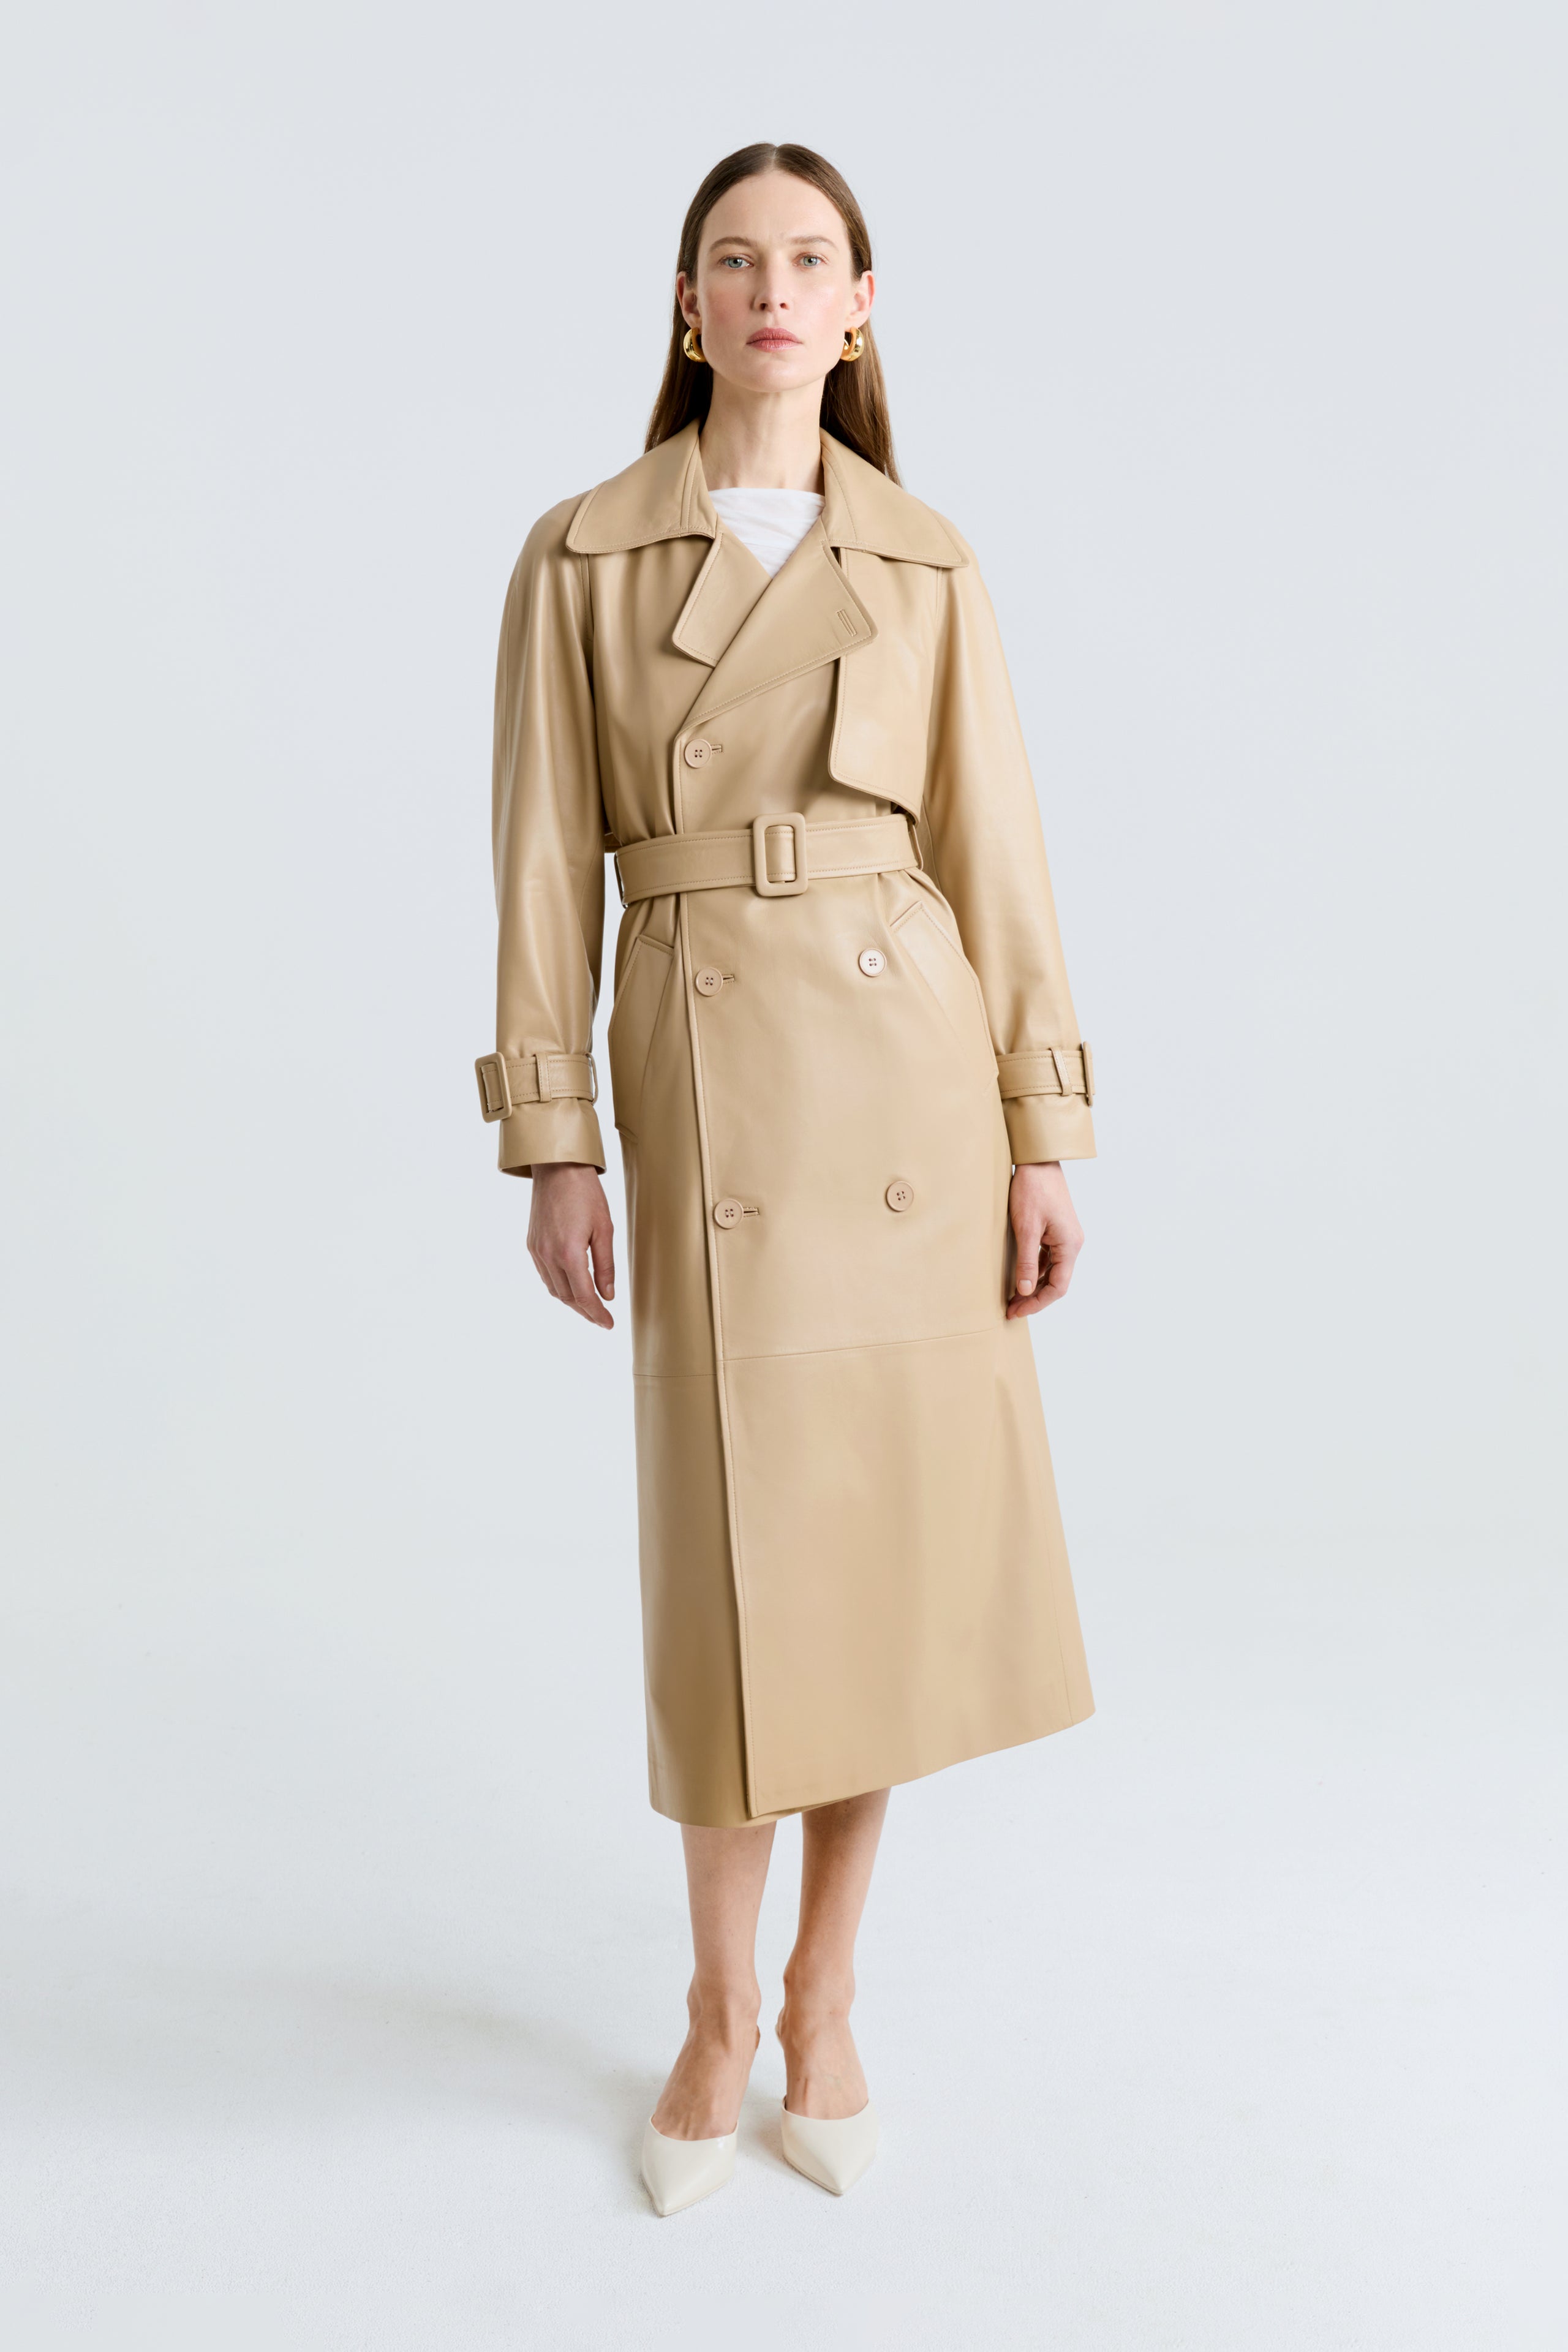 Model is wearing the Henri Beige Oversized Leather Trench Front